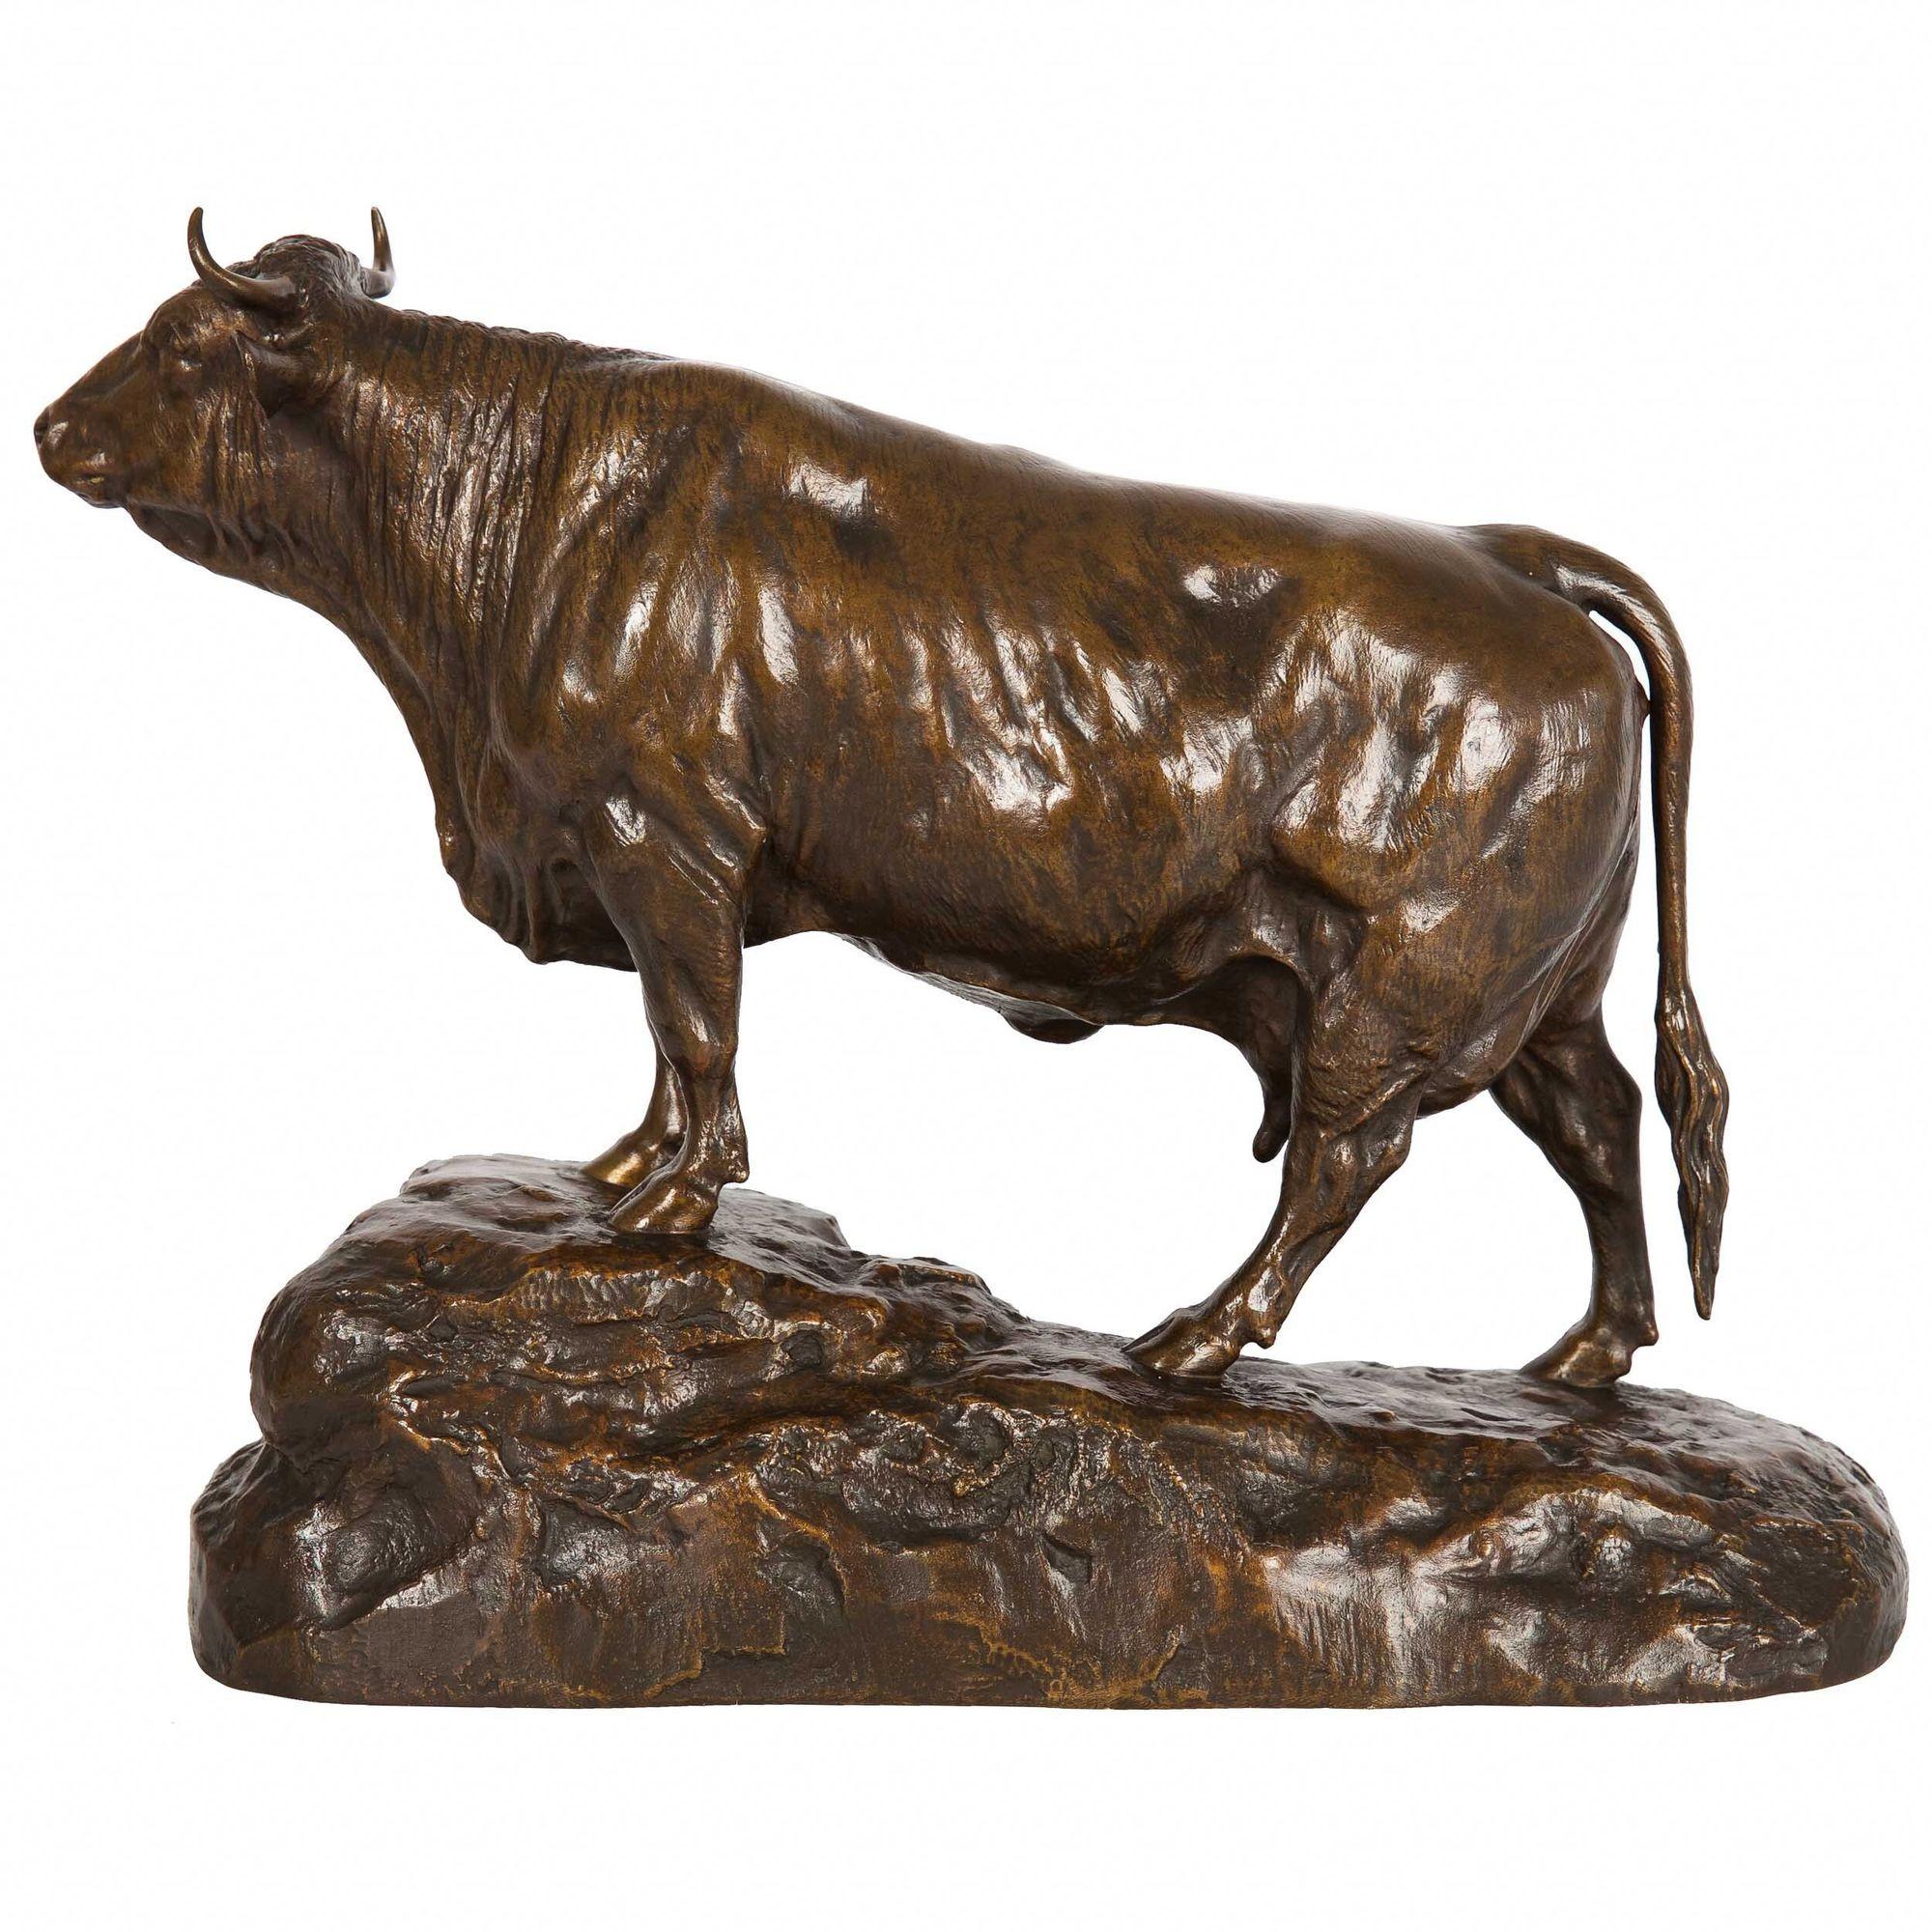 A rare and exquisite study of a standing cow by Isidore Jules Bonheur, the bronze model depicts a cow walking up a slope over a naturalistic base with her head raised to peer towards the horizon. The surface texture is typical of Bonheur's careful